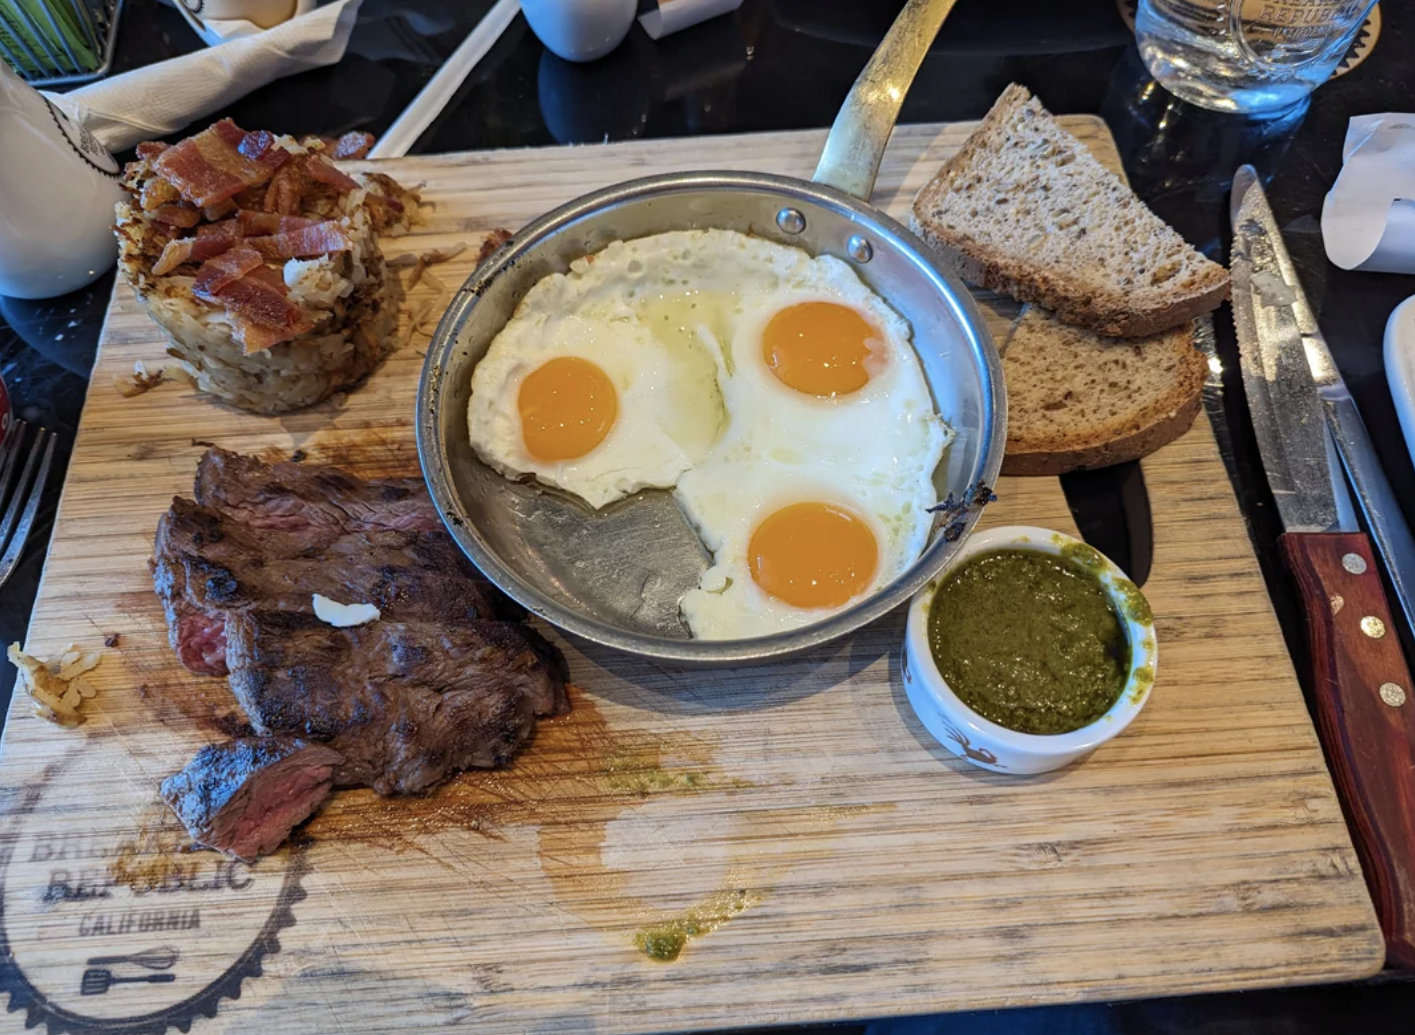 Hearty breakfast of eggs, steak, toast, and hash with condiments on a restaurant table